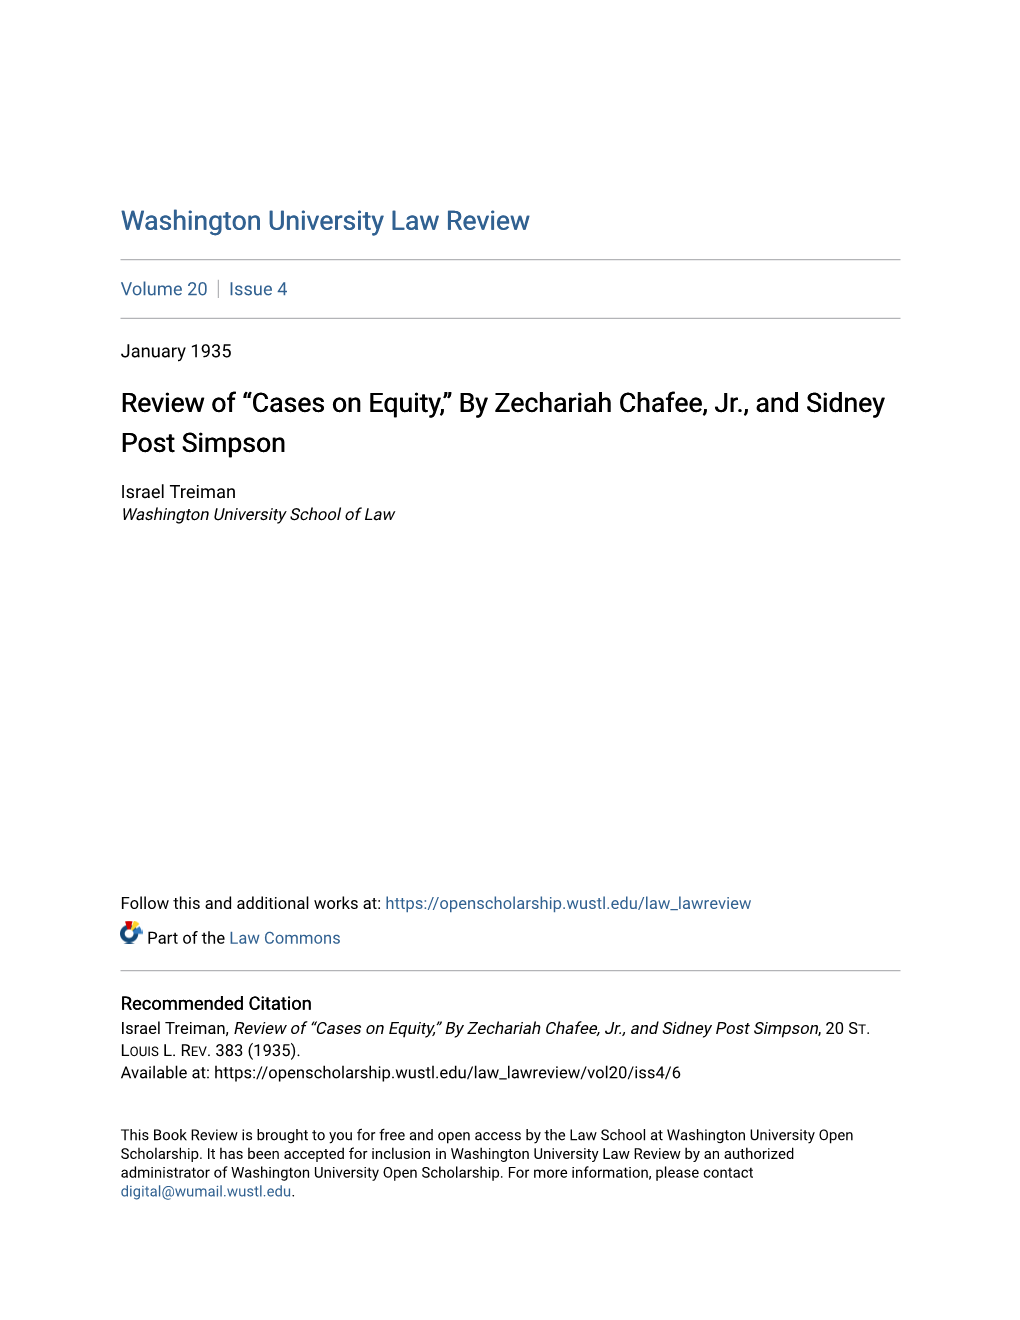 Review of “Cases on Equity,” by Zechariah Chafee, Jr., and Sidney Post Simpson